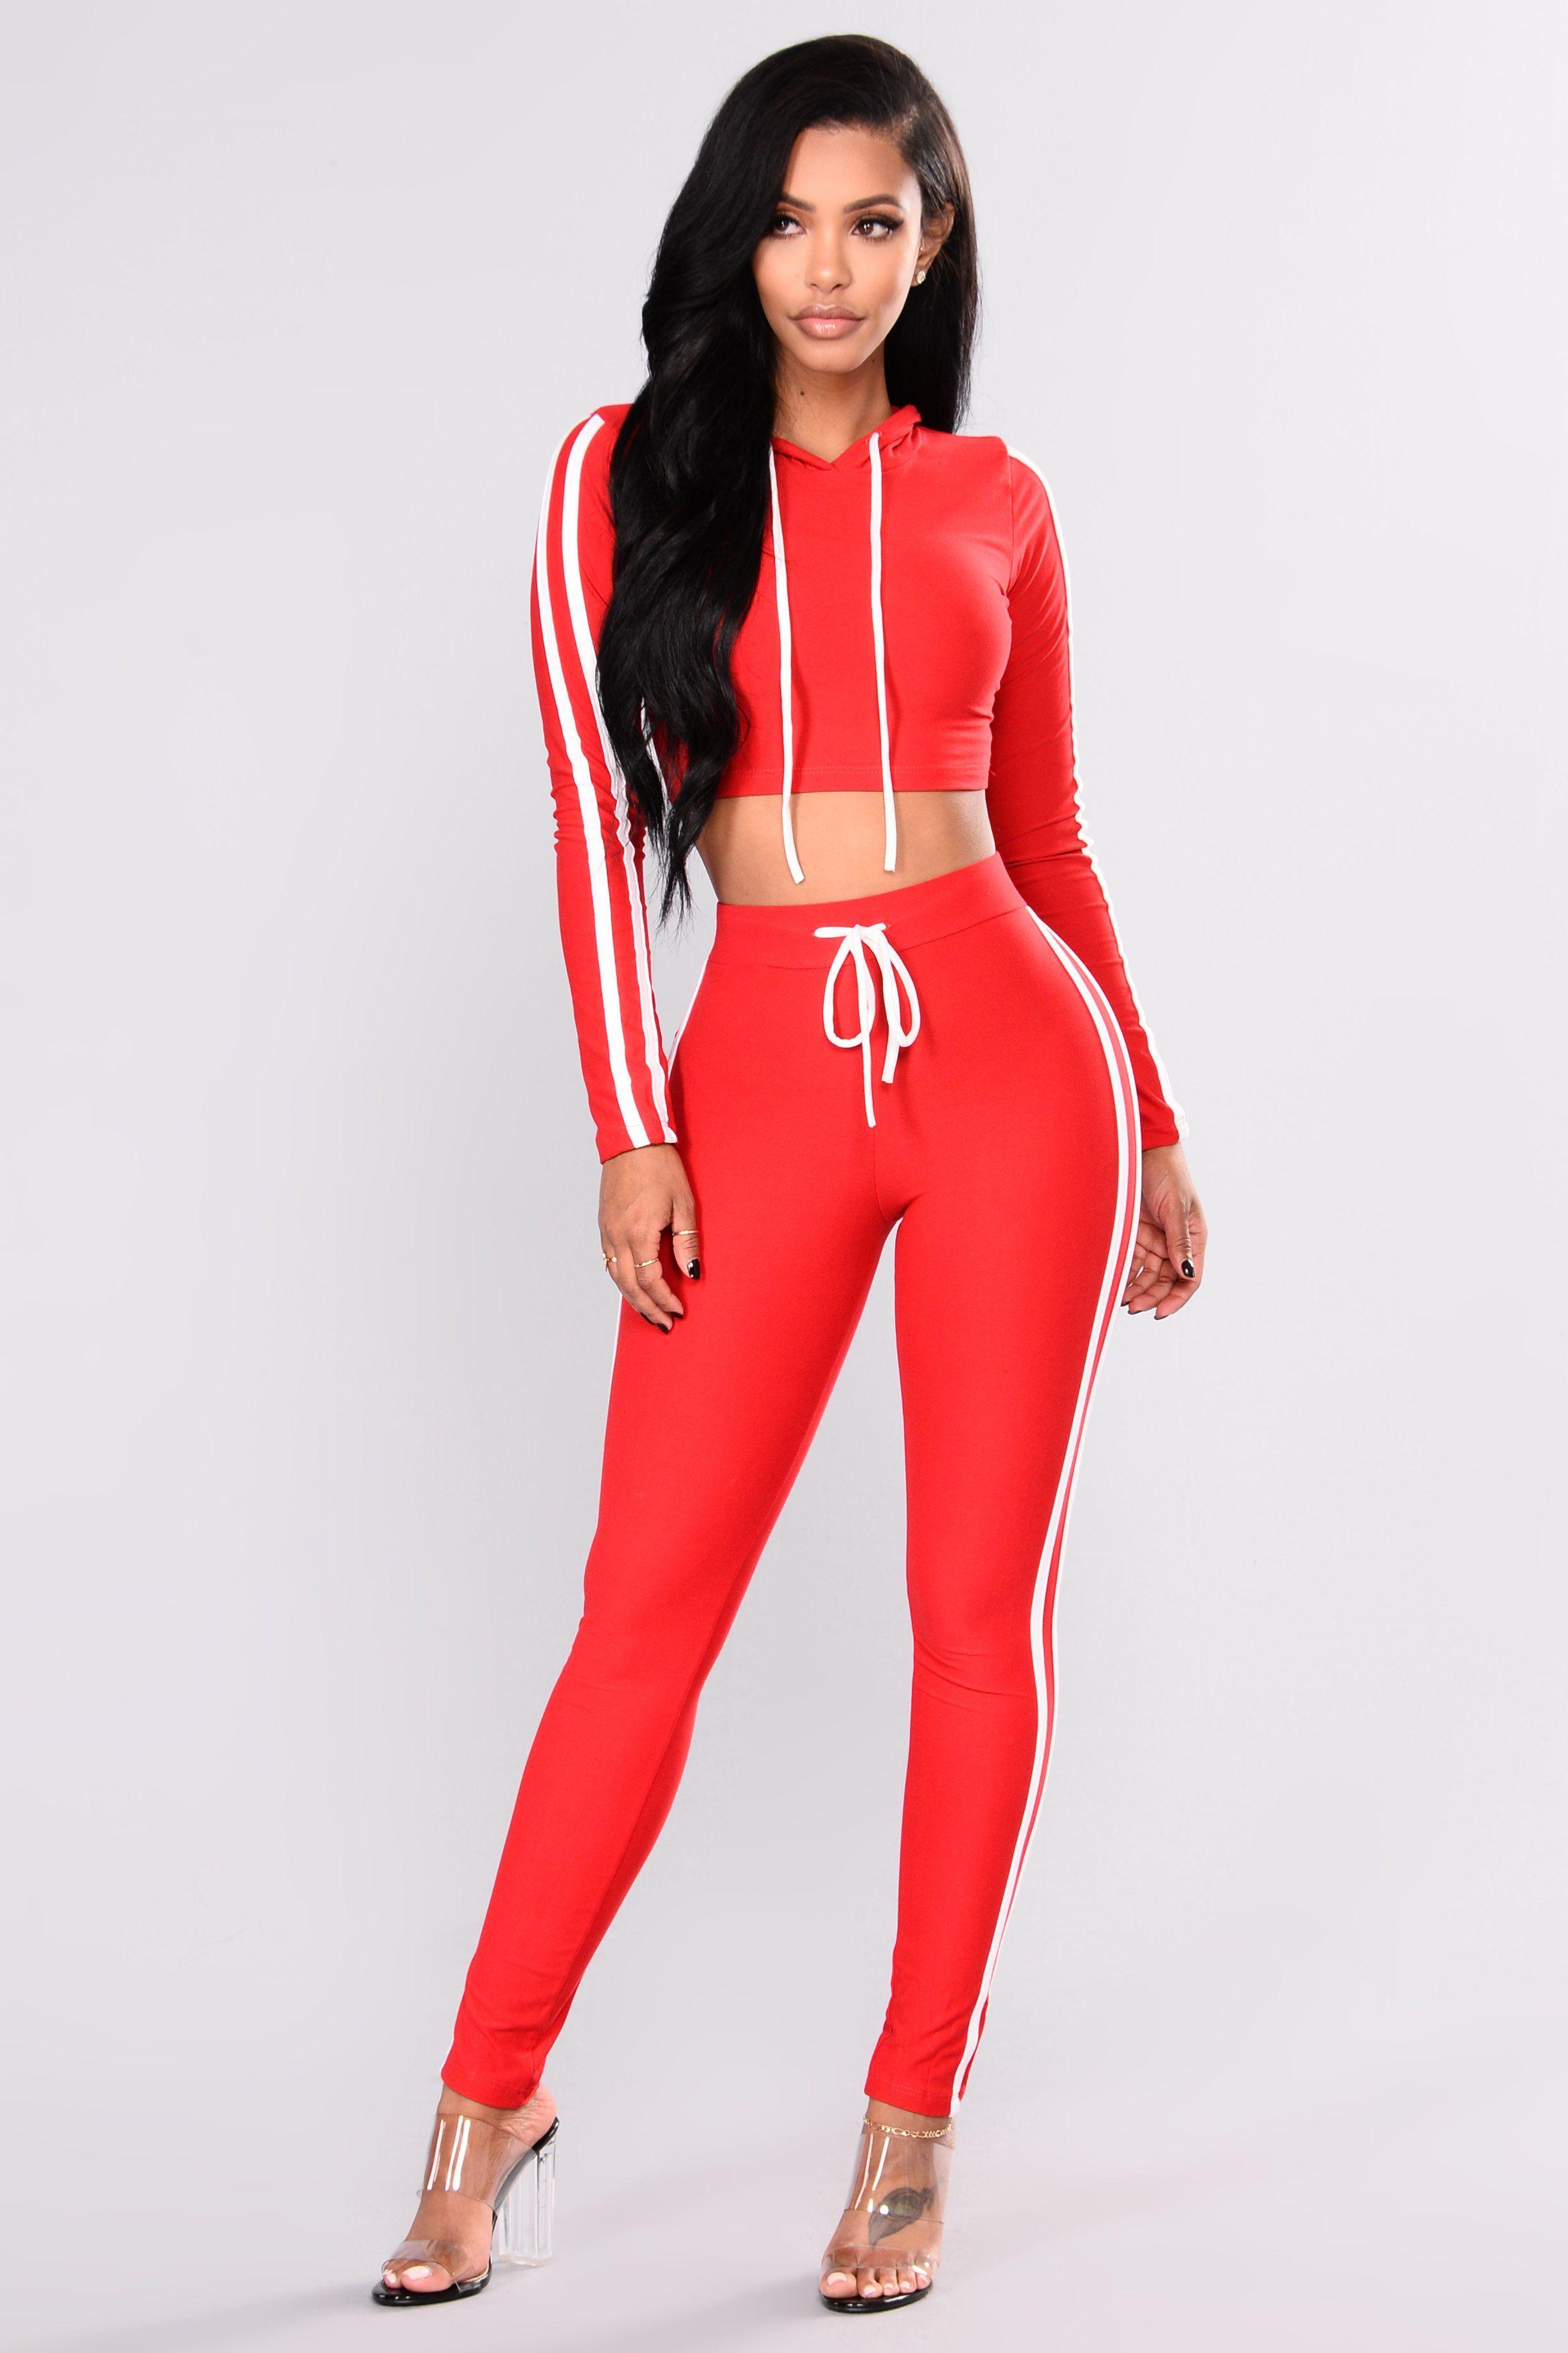 Red and White Fashion Logo - Tennis Courts II Set - Red/White